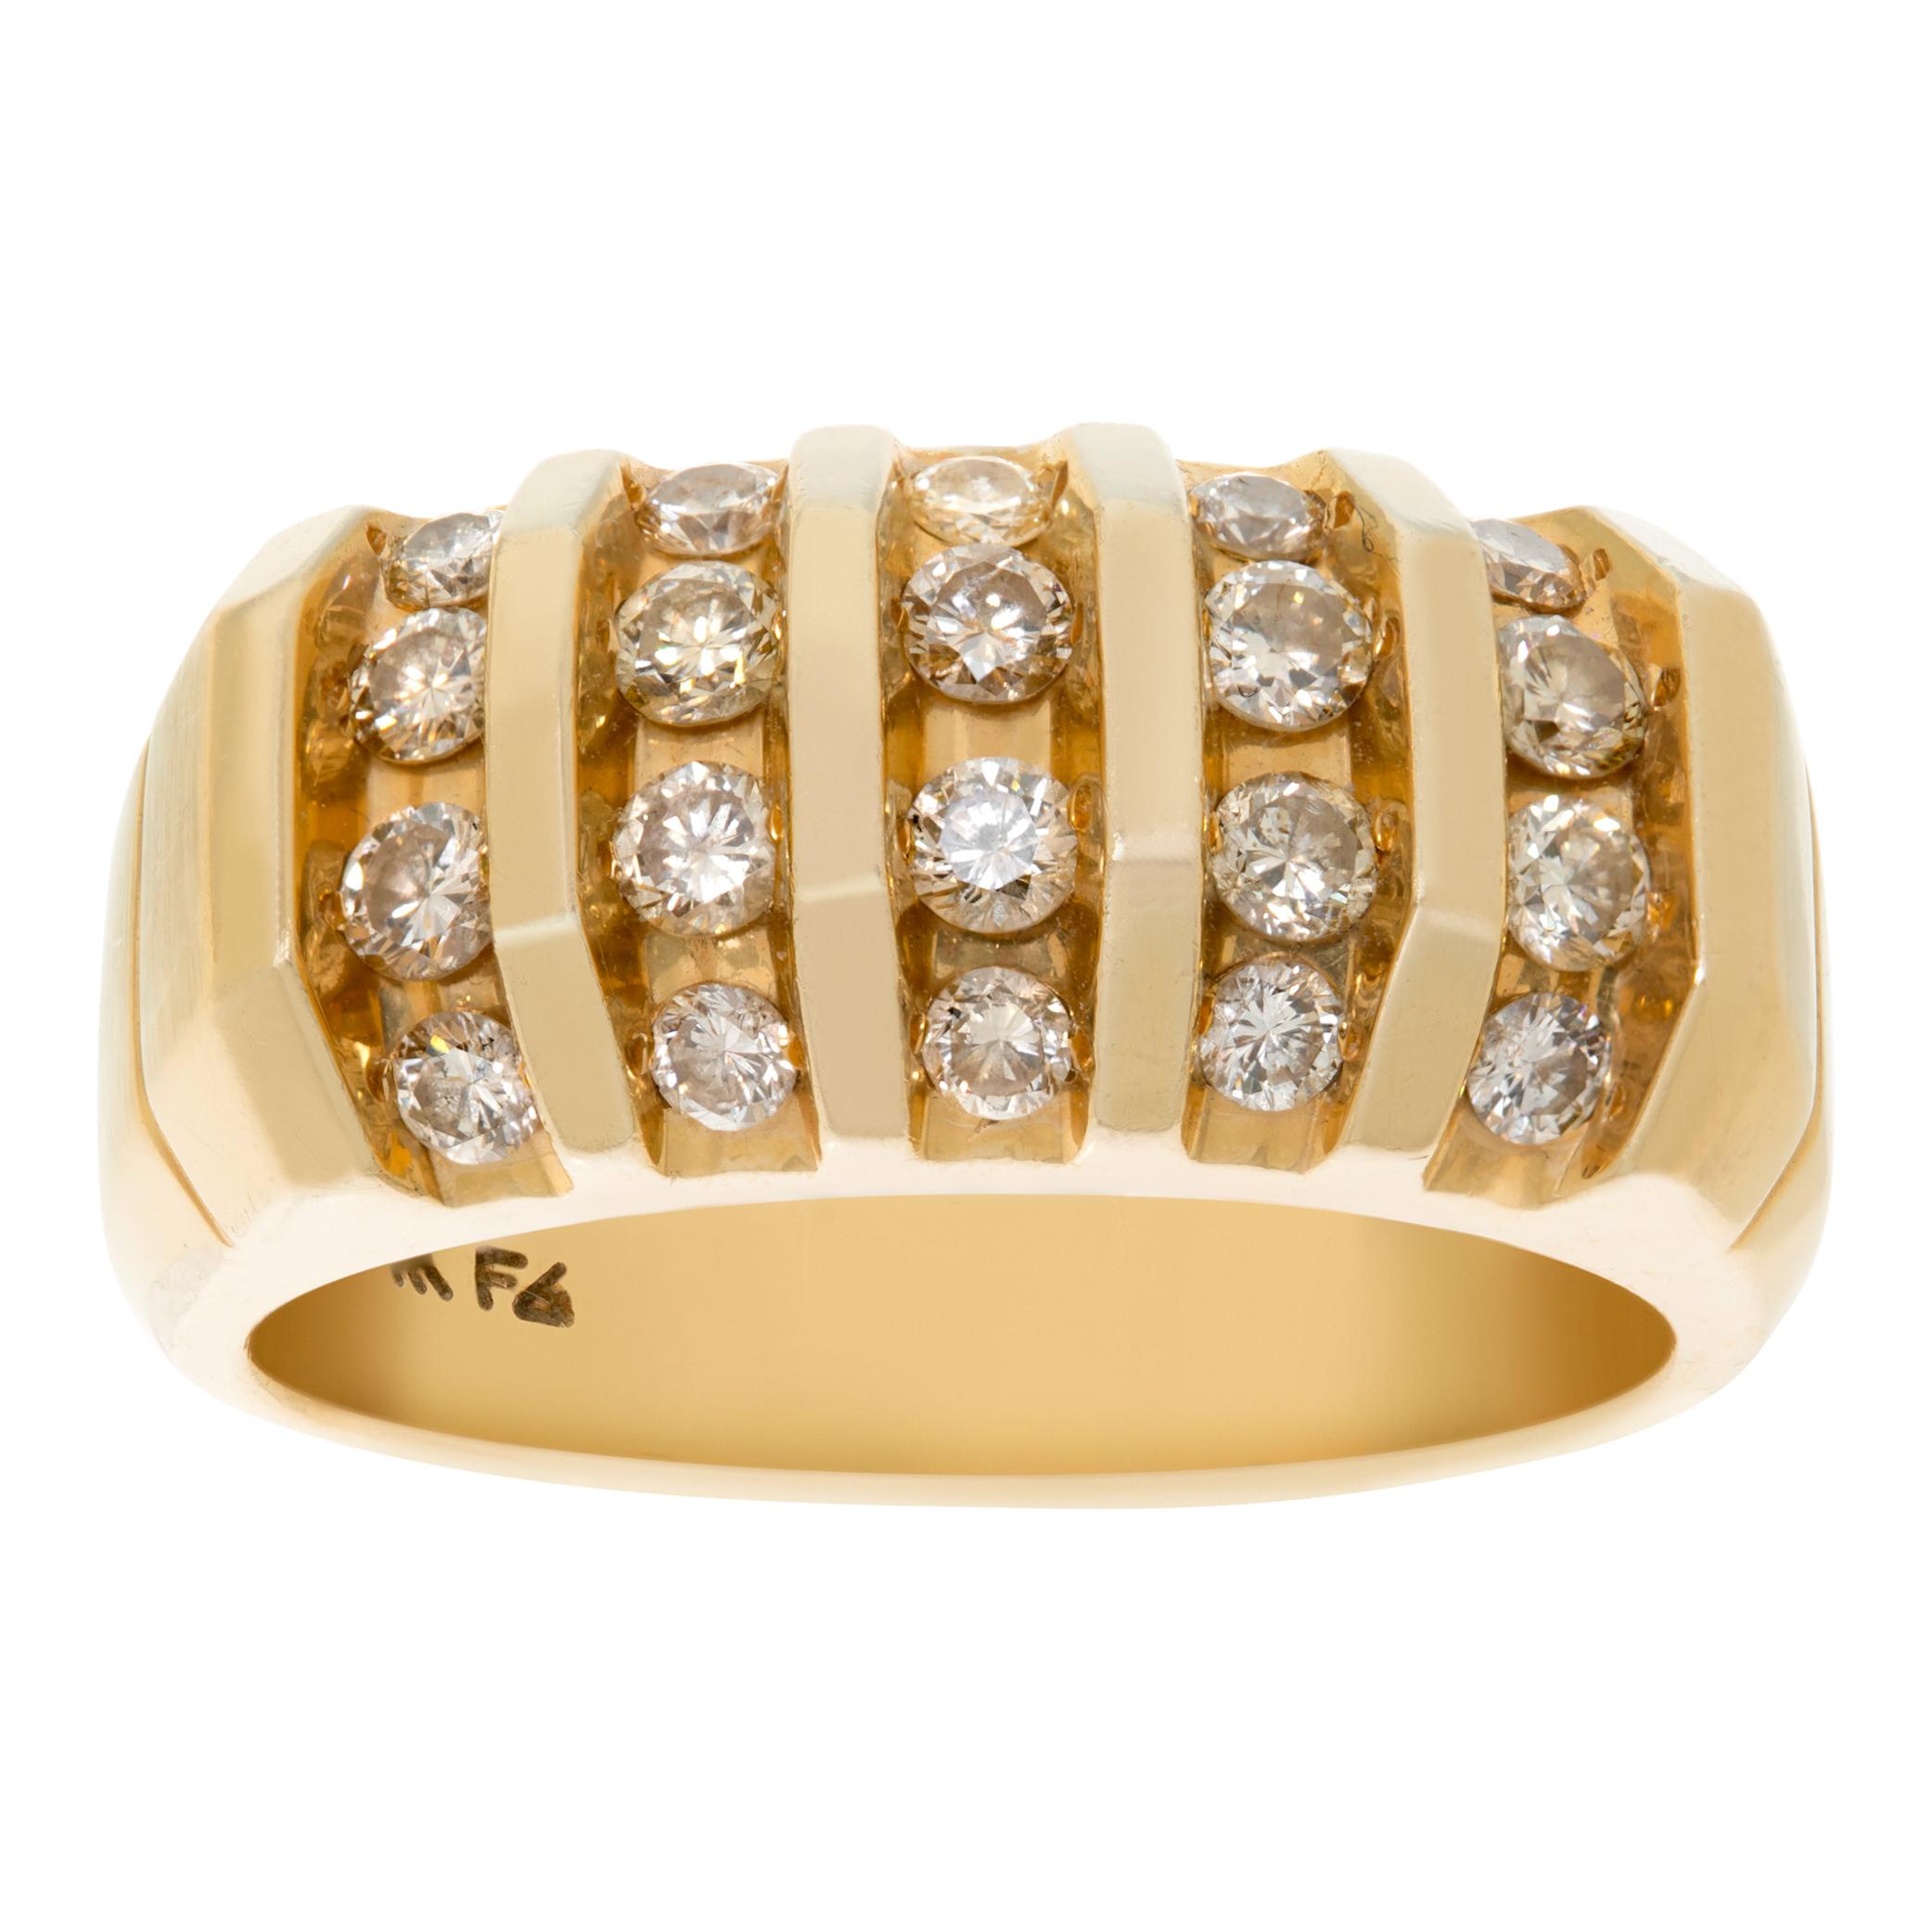 5-row channel set diamond ring in yellow gold